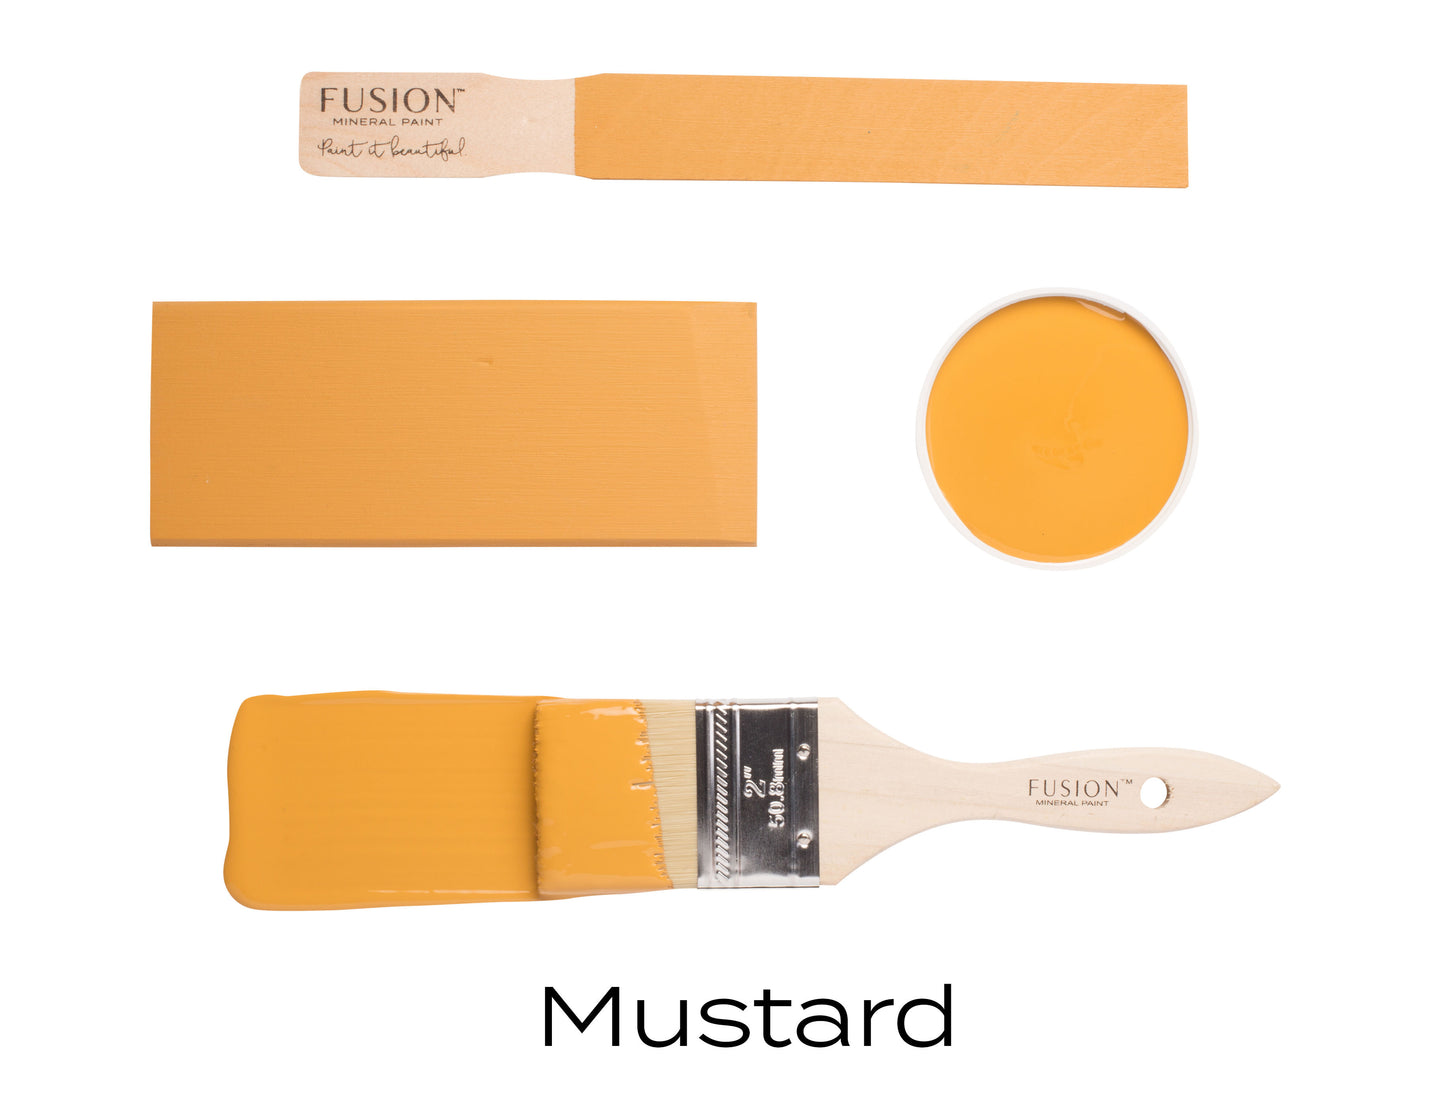 Mustard by Fusion